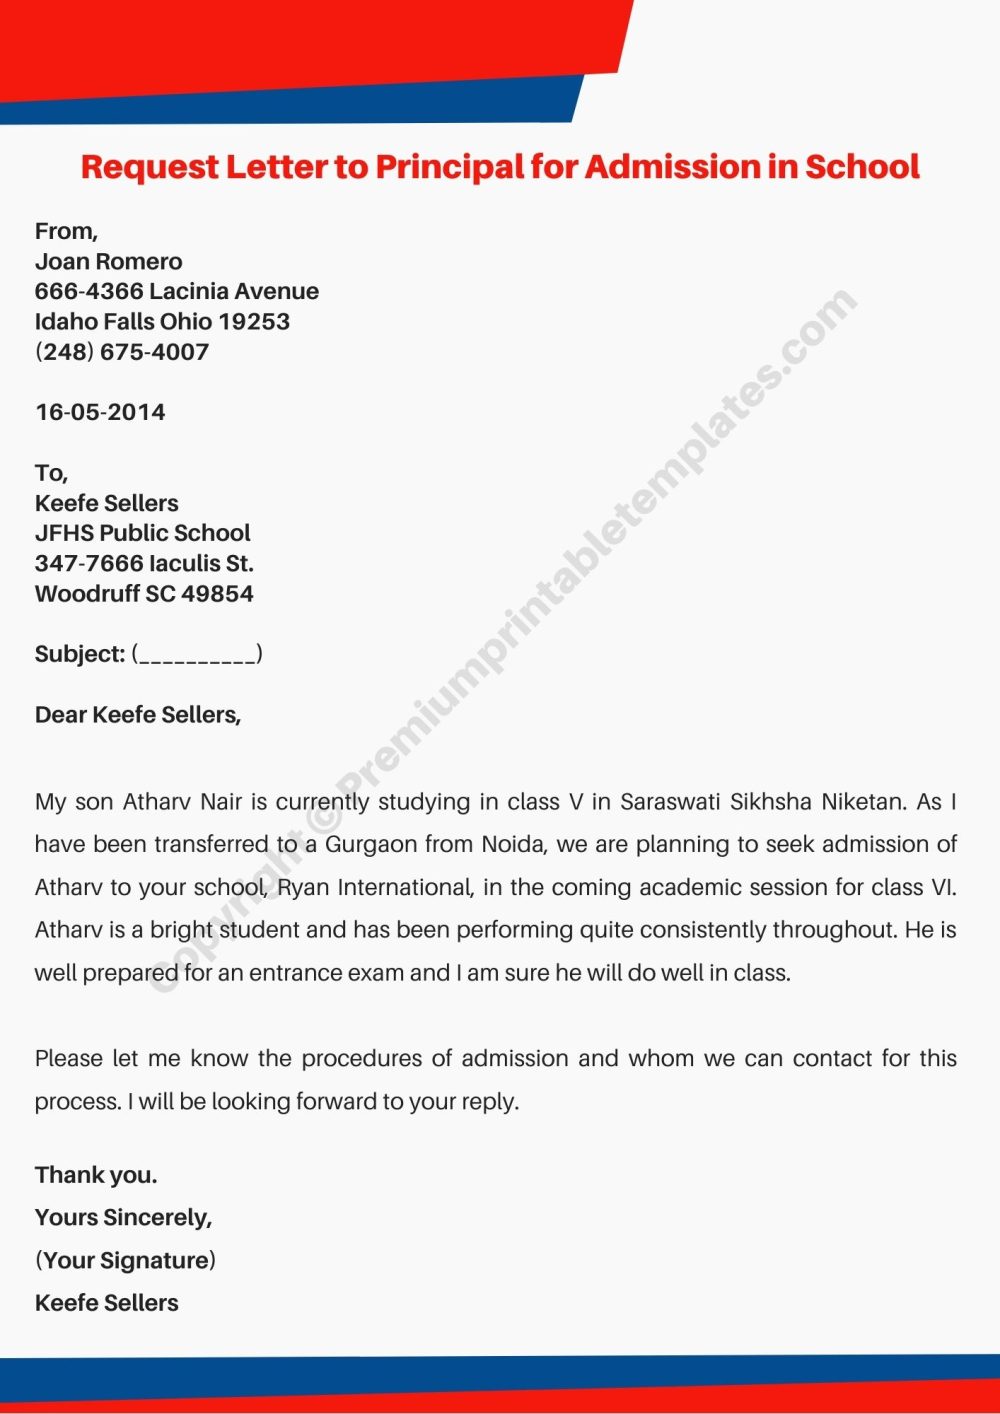 Request Letter to Principal for admission